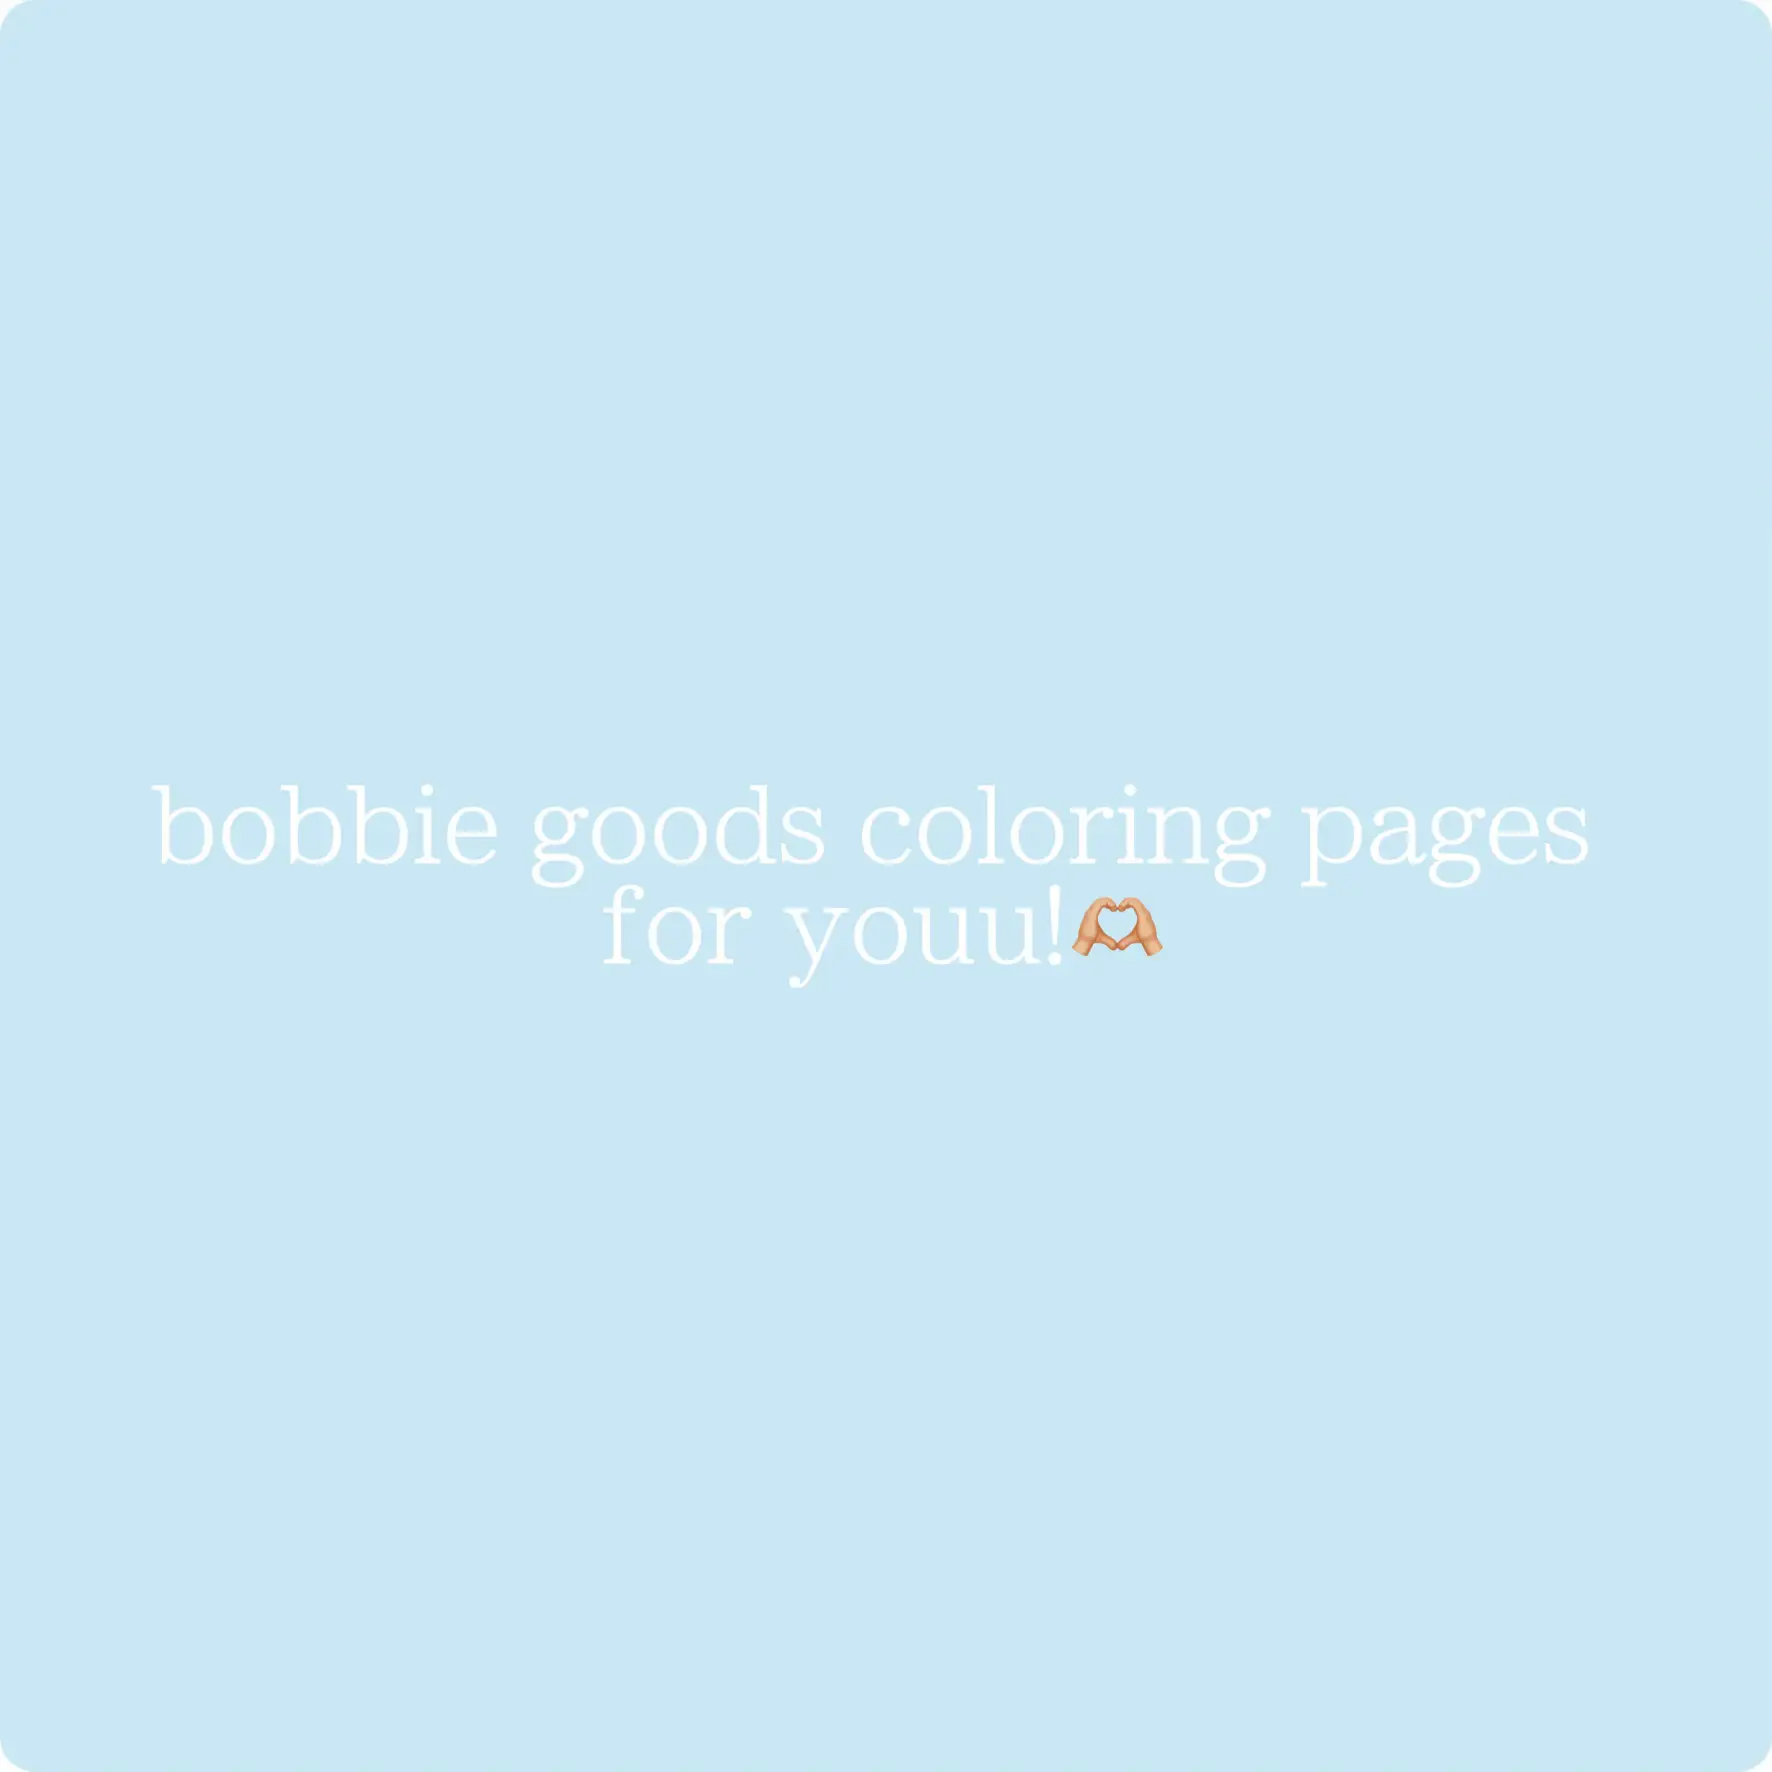 POV you download @bobbiegoods! digital coloring pages and import them, Bobbie Goods Coloring Book